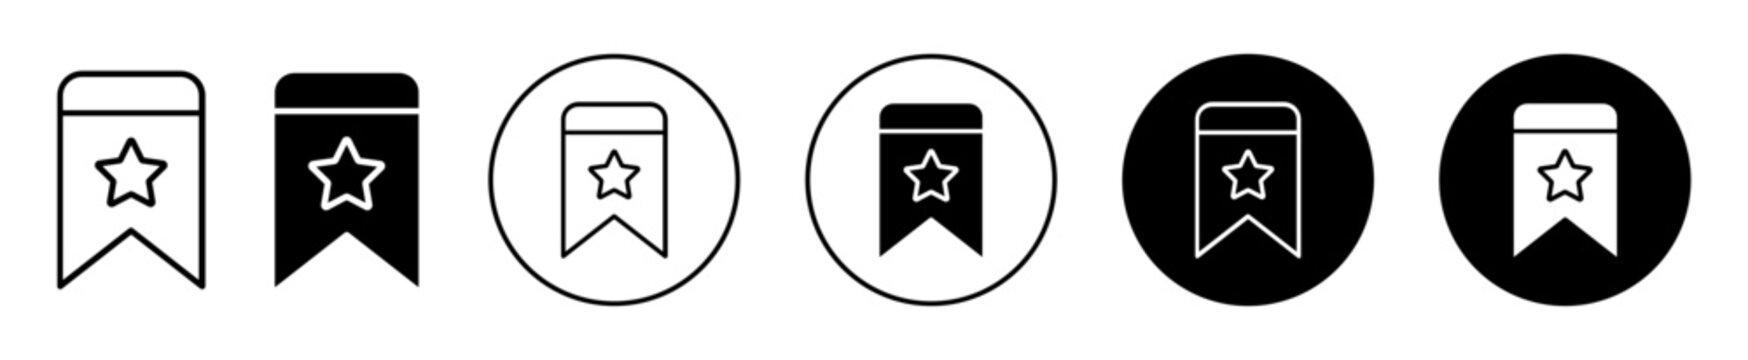 Bookmark star icon. add online webpage to bookmark or save favorite in browser symbol set. internet rate value or prize bookmark ribbon flag or tag vector logo. review favorite page button 